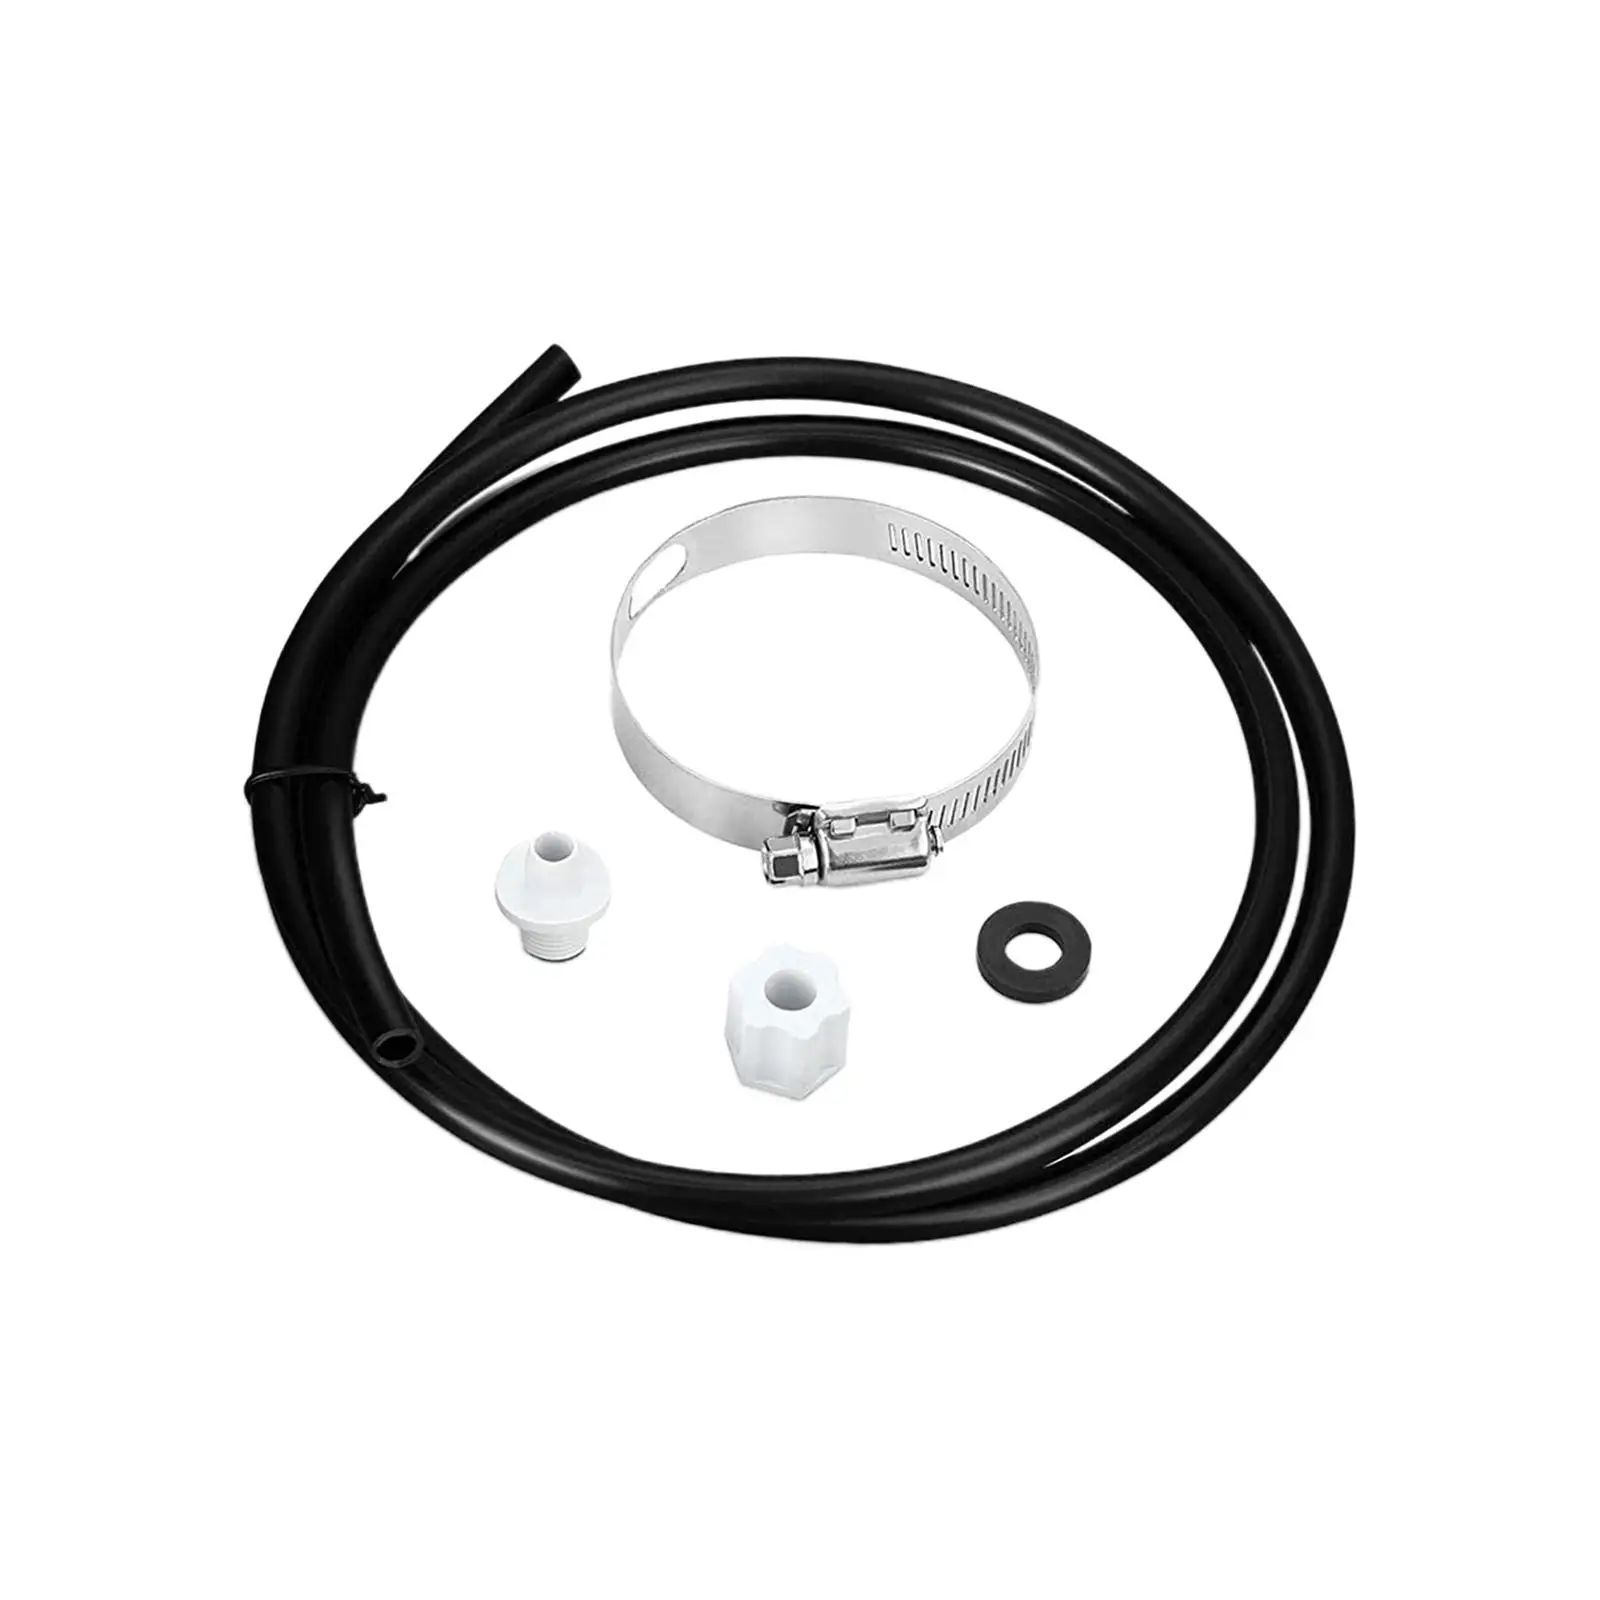 Offline Feeder Connection Pack with Saddle Clamp Chlorinator Feeder Tube 4 Feet for CL200 CL220 Offline Pool Feeder Replacement